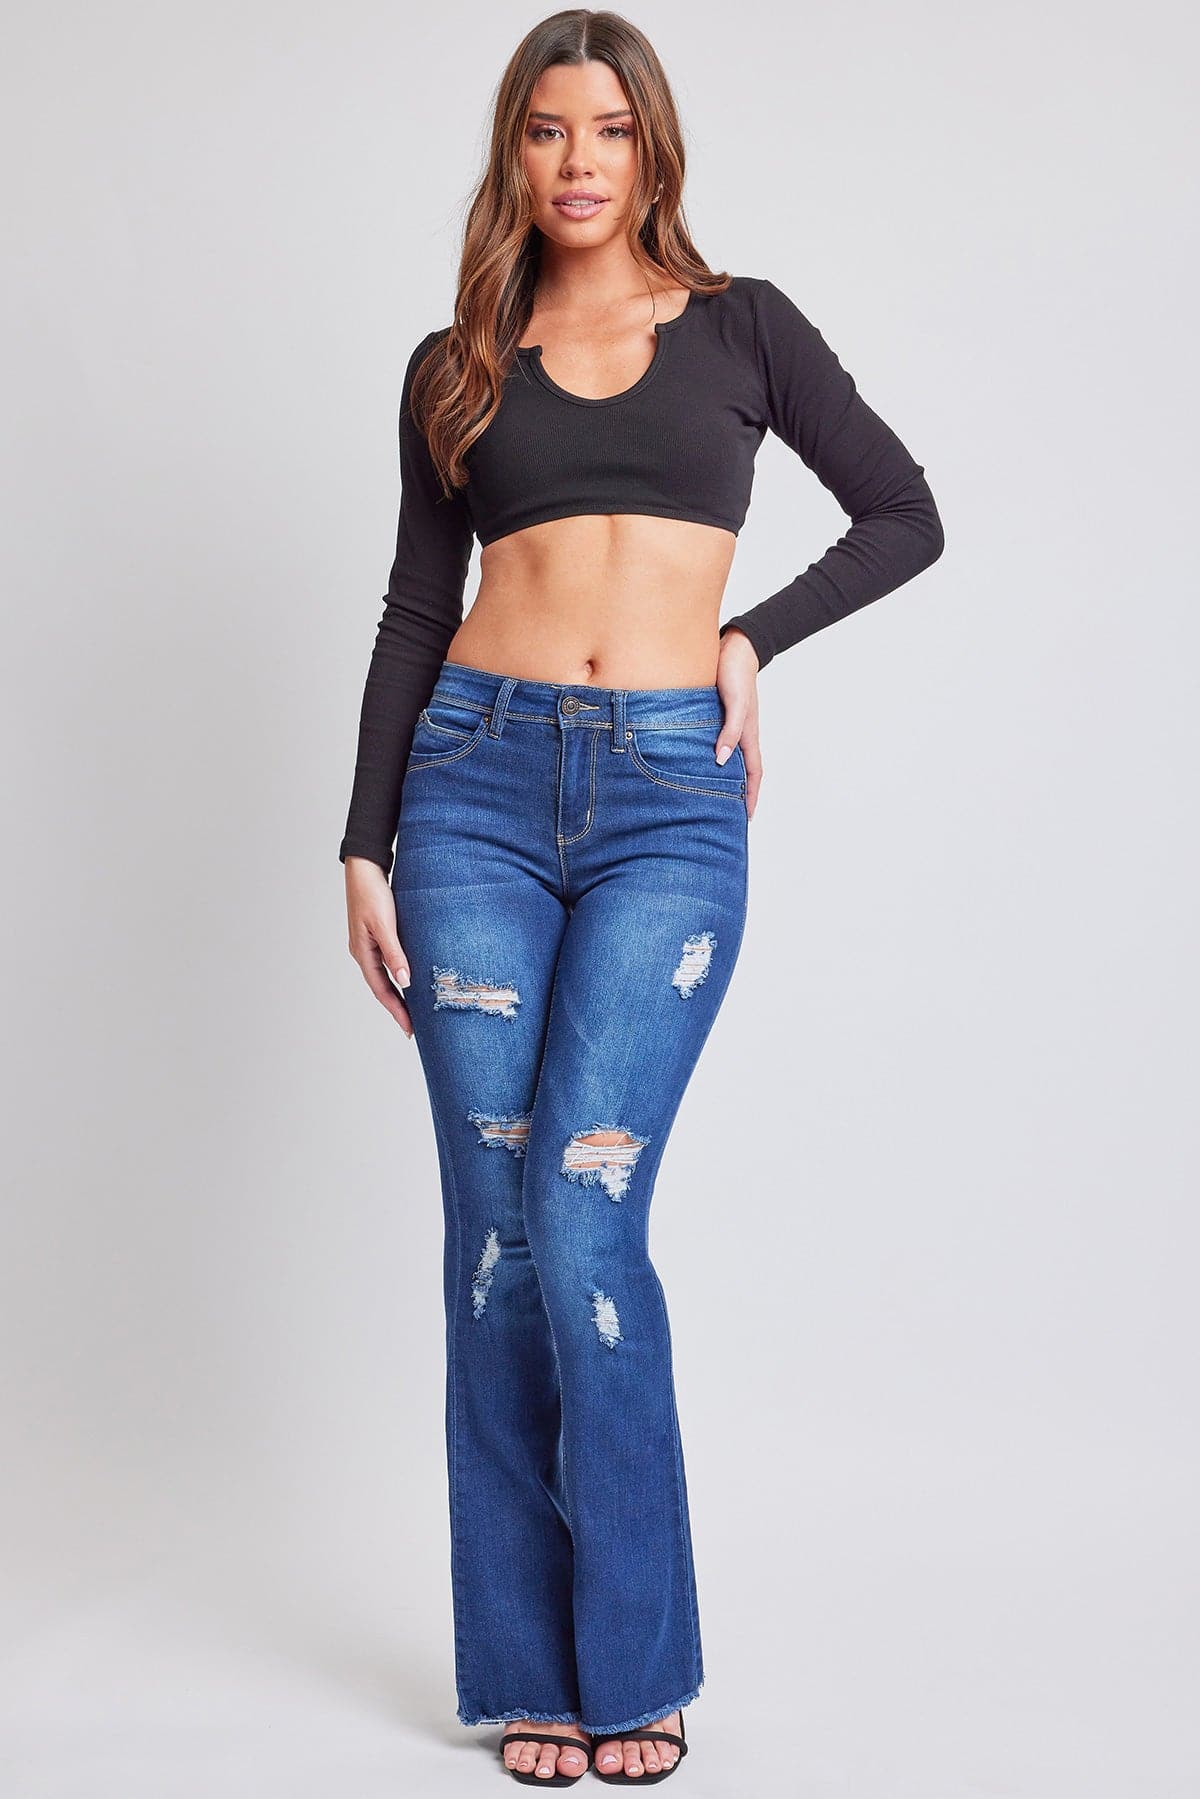 bell bottom jeans for plus size｜TikTok Search